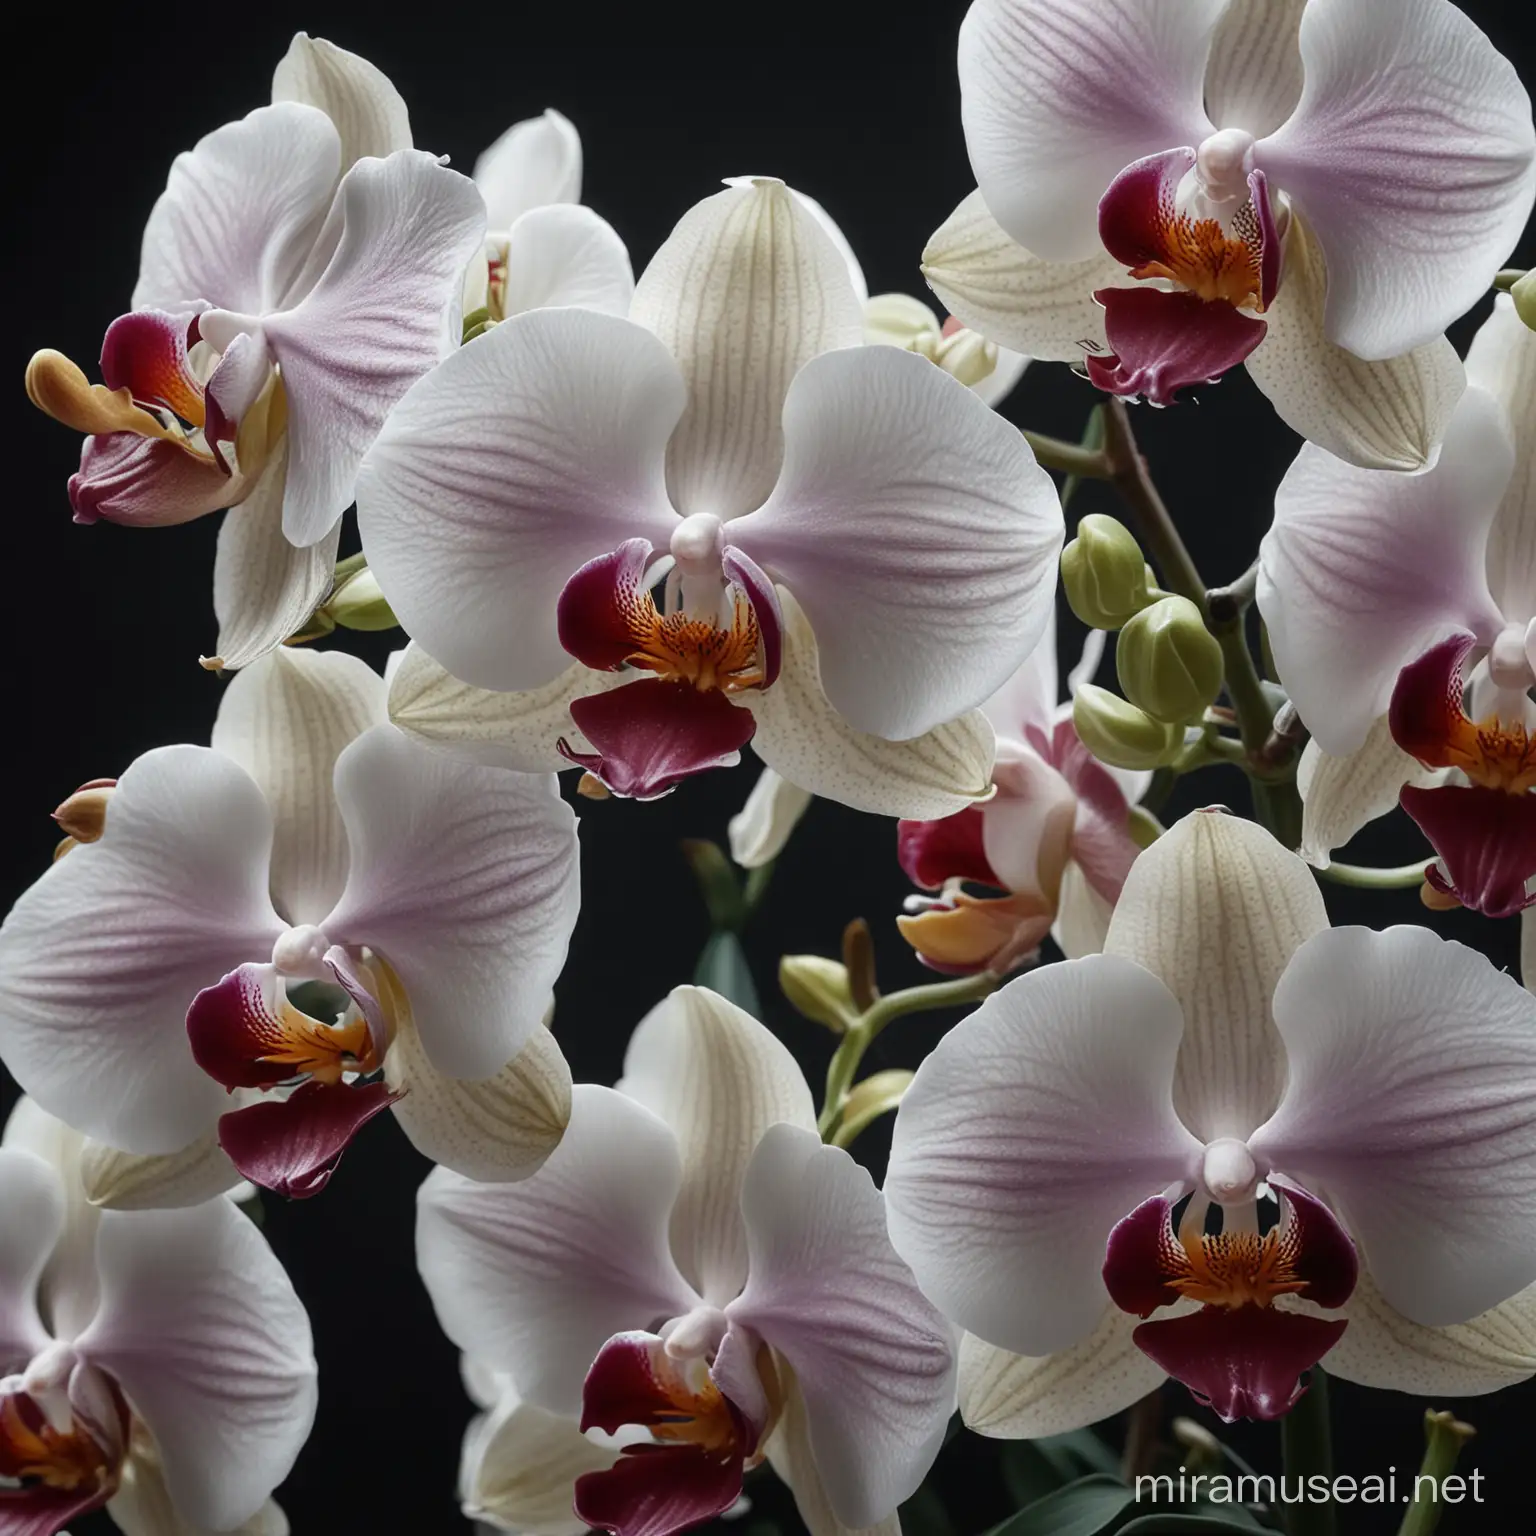 Intimate Orchid Blooms in Dramatic HighResolution Hyperrealism